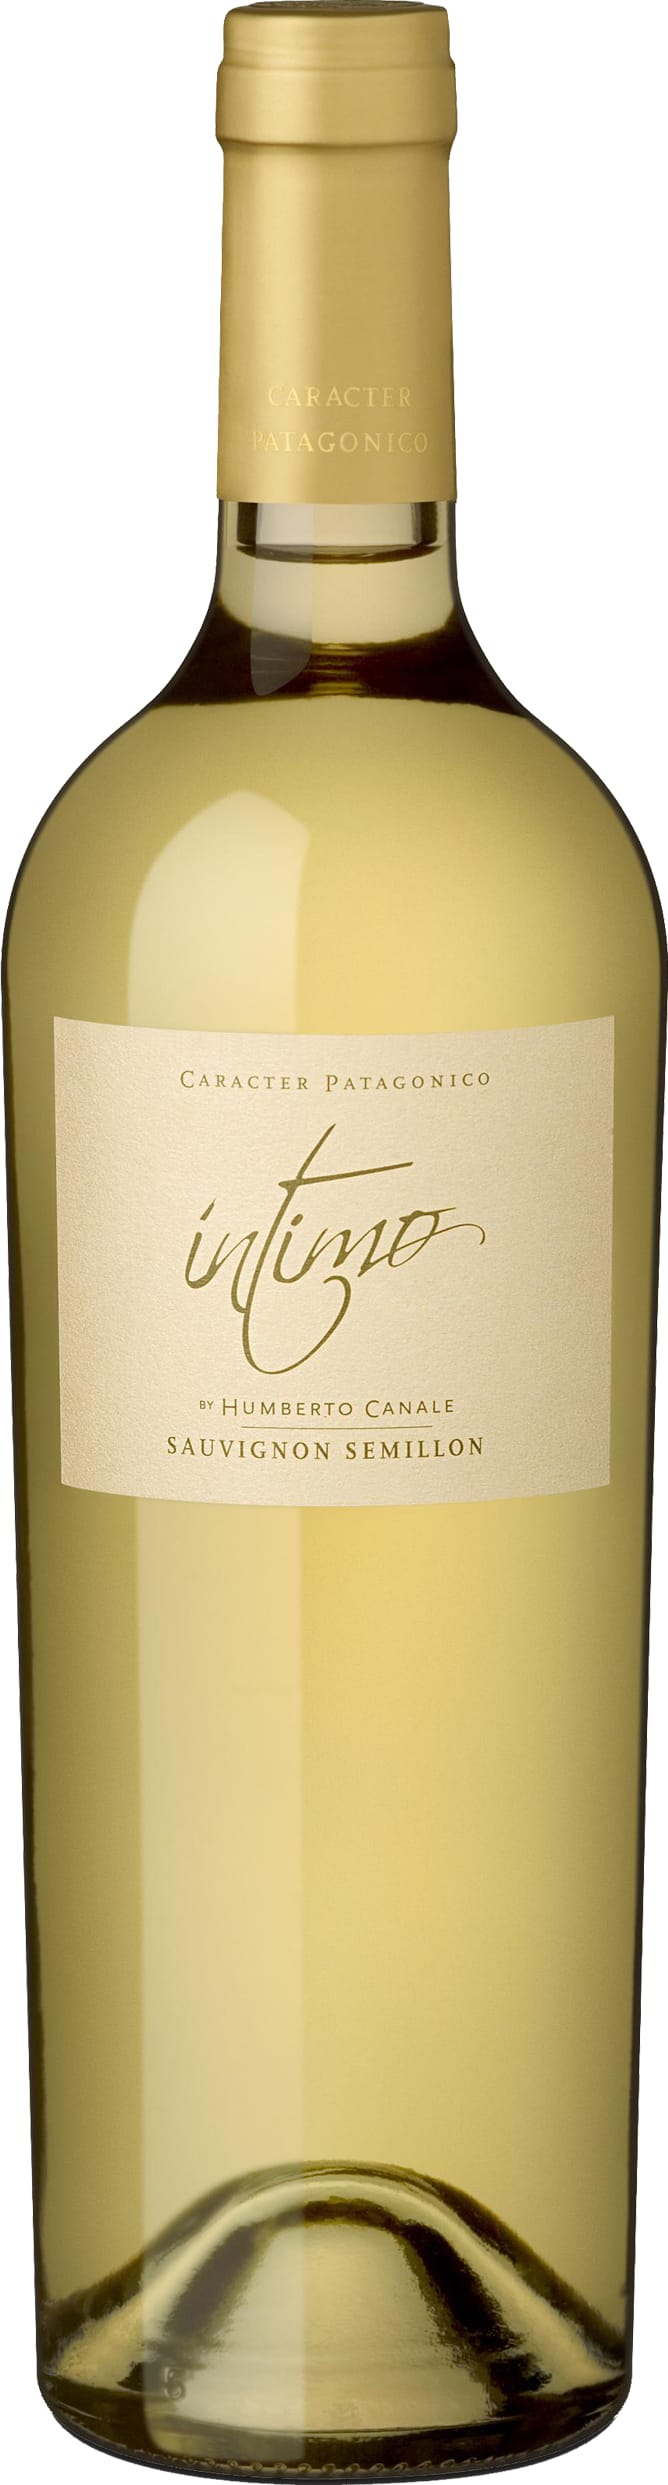 Humberto Canale Intimo Blanco 2021 75cl - Buy Humberto Canale Wines from GREAT WINES DIRECT wine shop